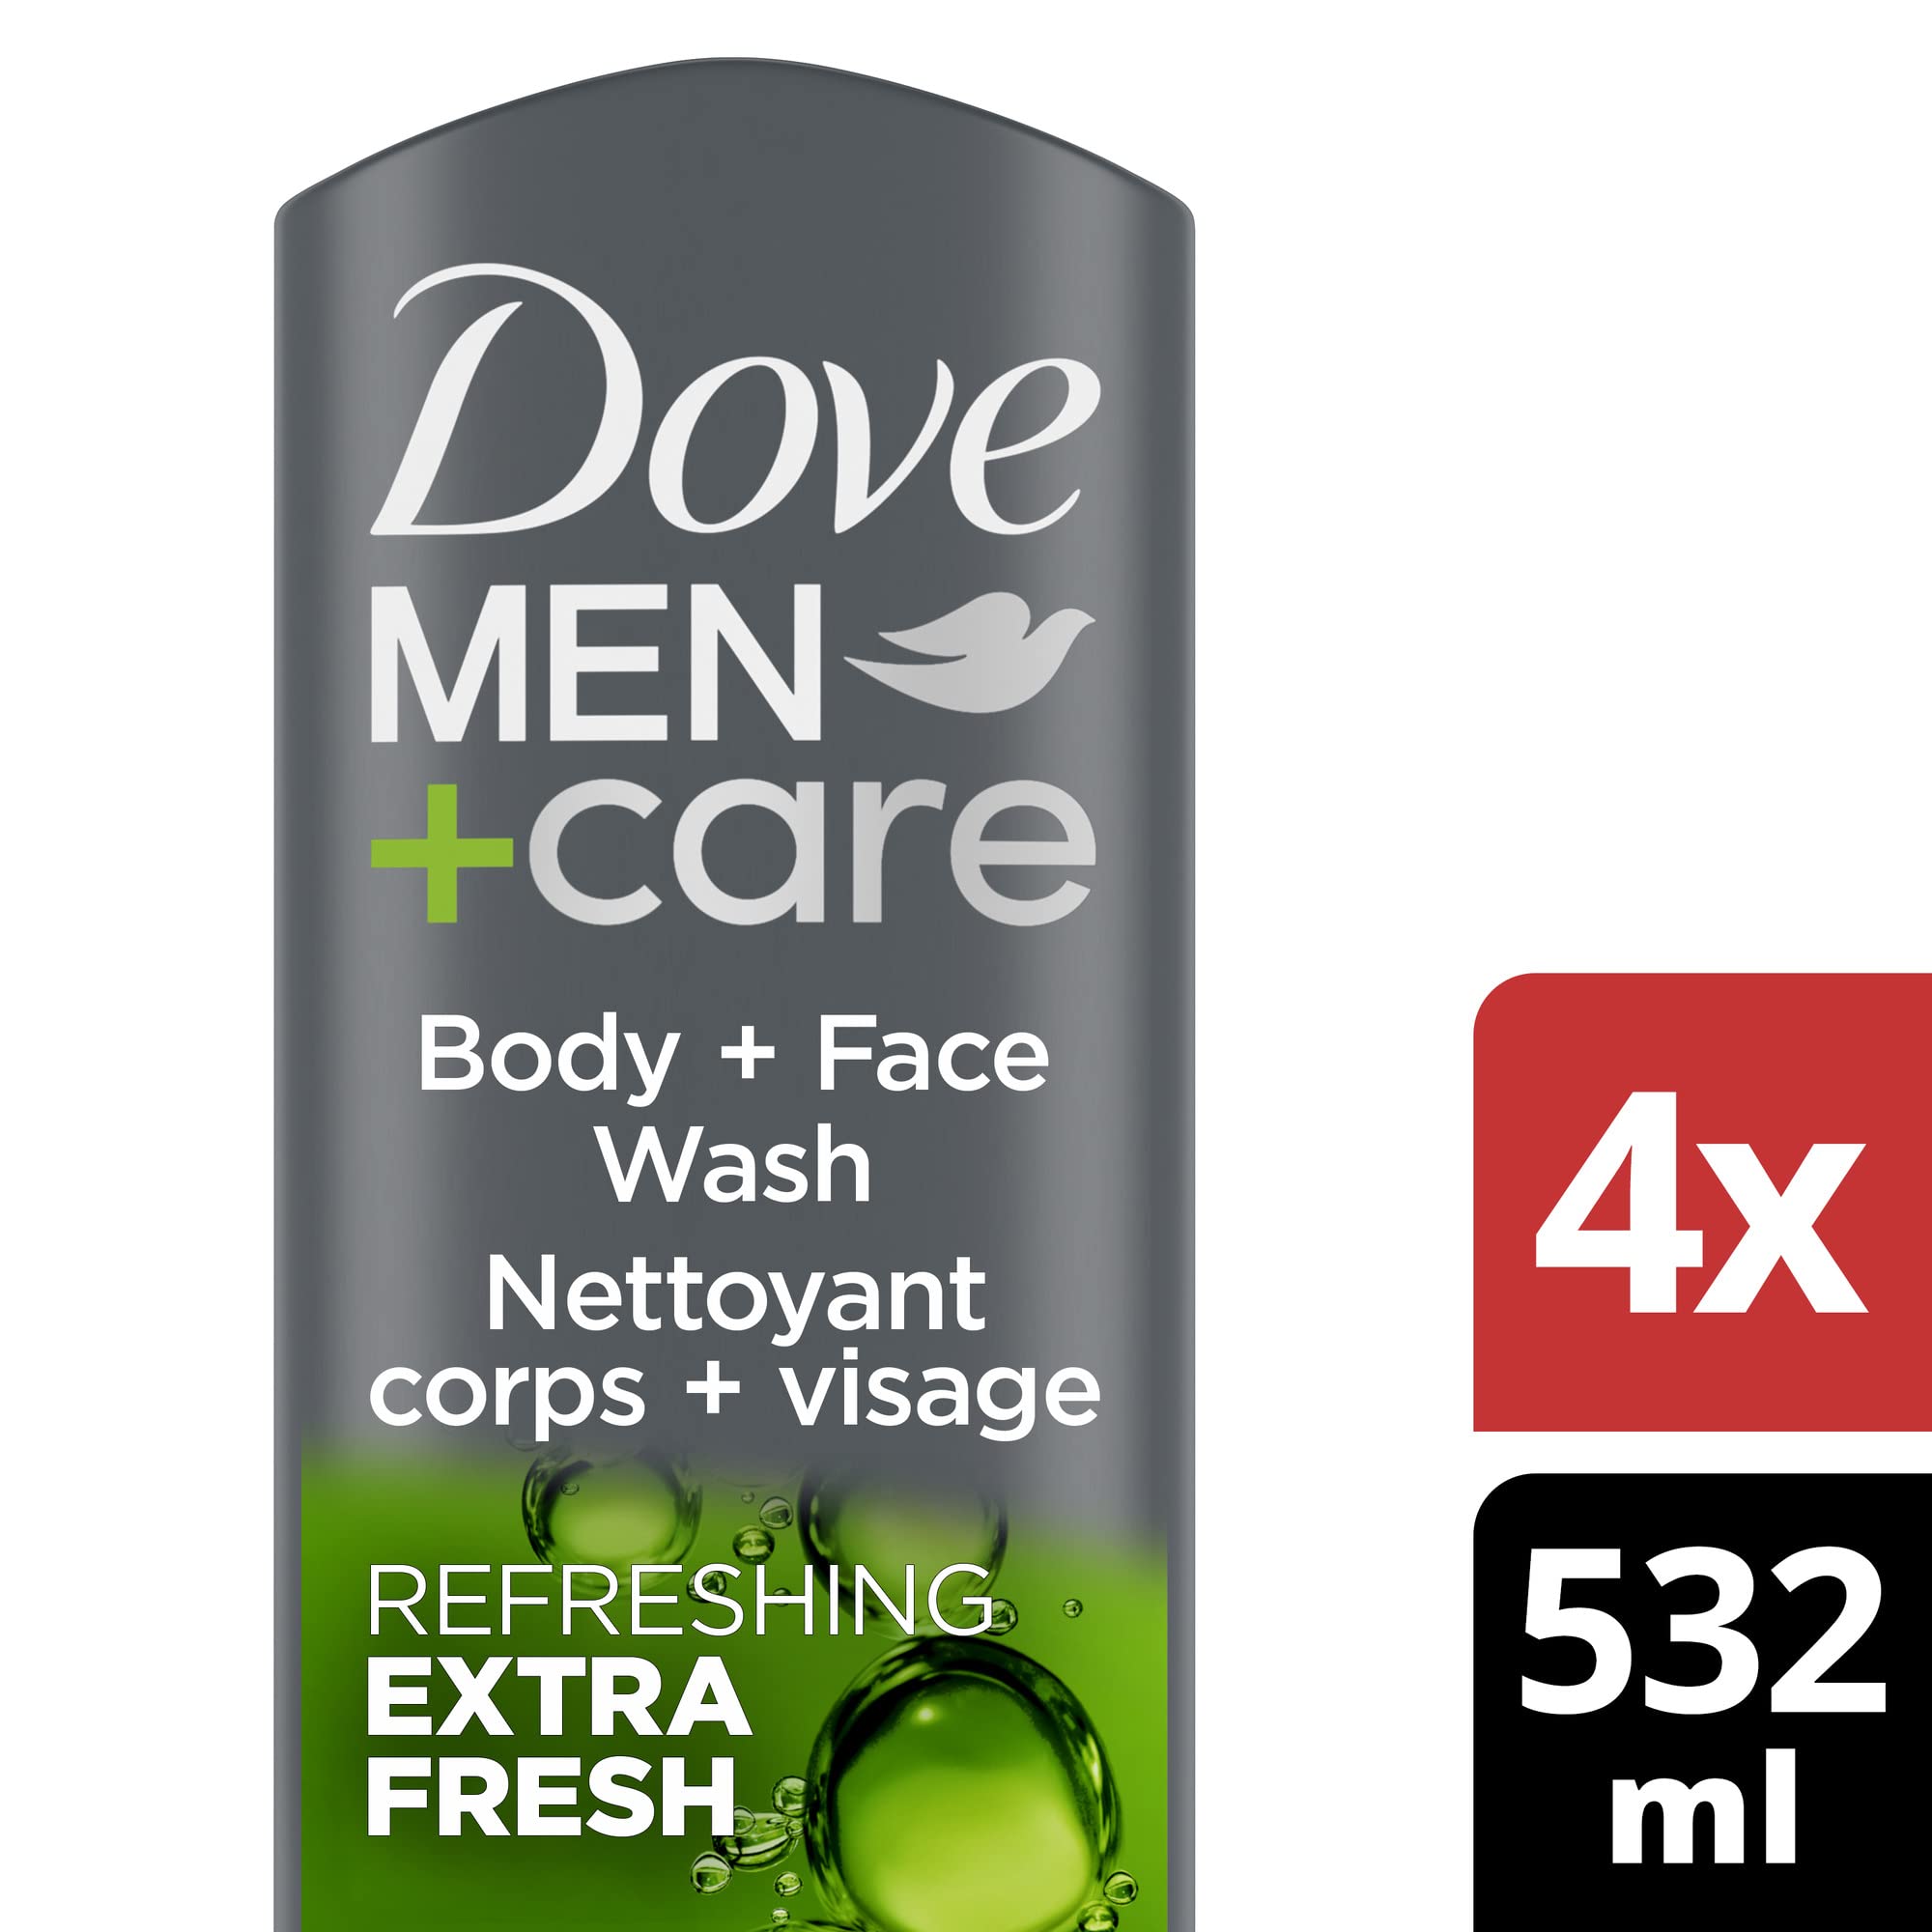 Dove Men+Care Body Wash Extra Fresh for Men's Skin Care Body Wash Effectively Washes Away Bacteria While Nourishing Your Skin, 18 Fl Oz (Pack of 4)